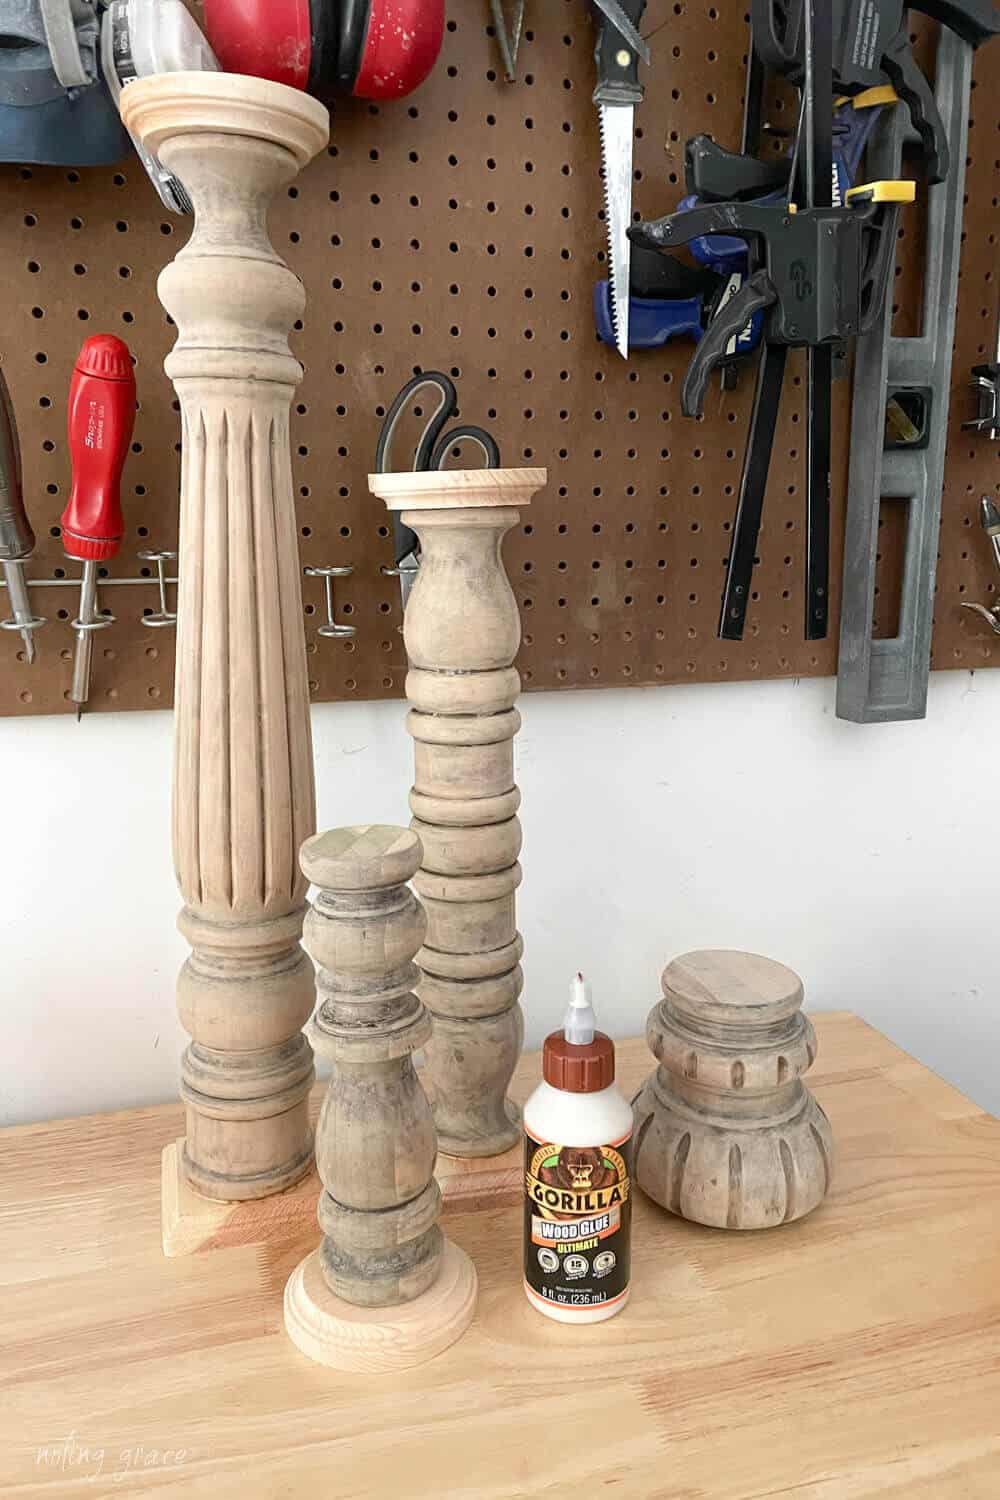 sanded bed posts ready with bases added to make candlesticks